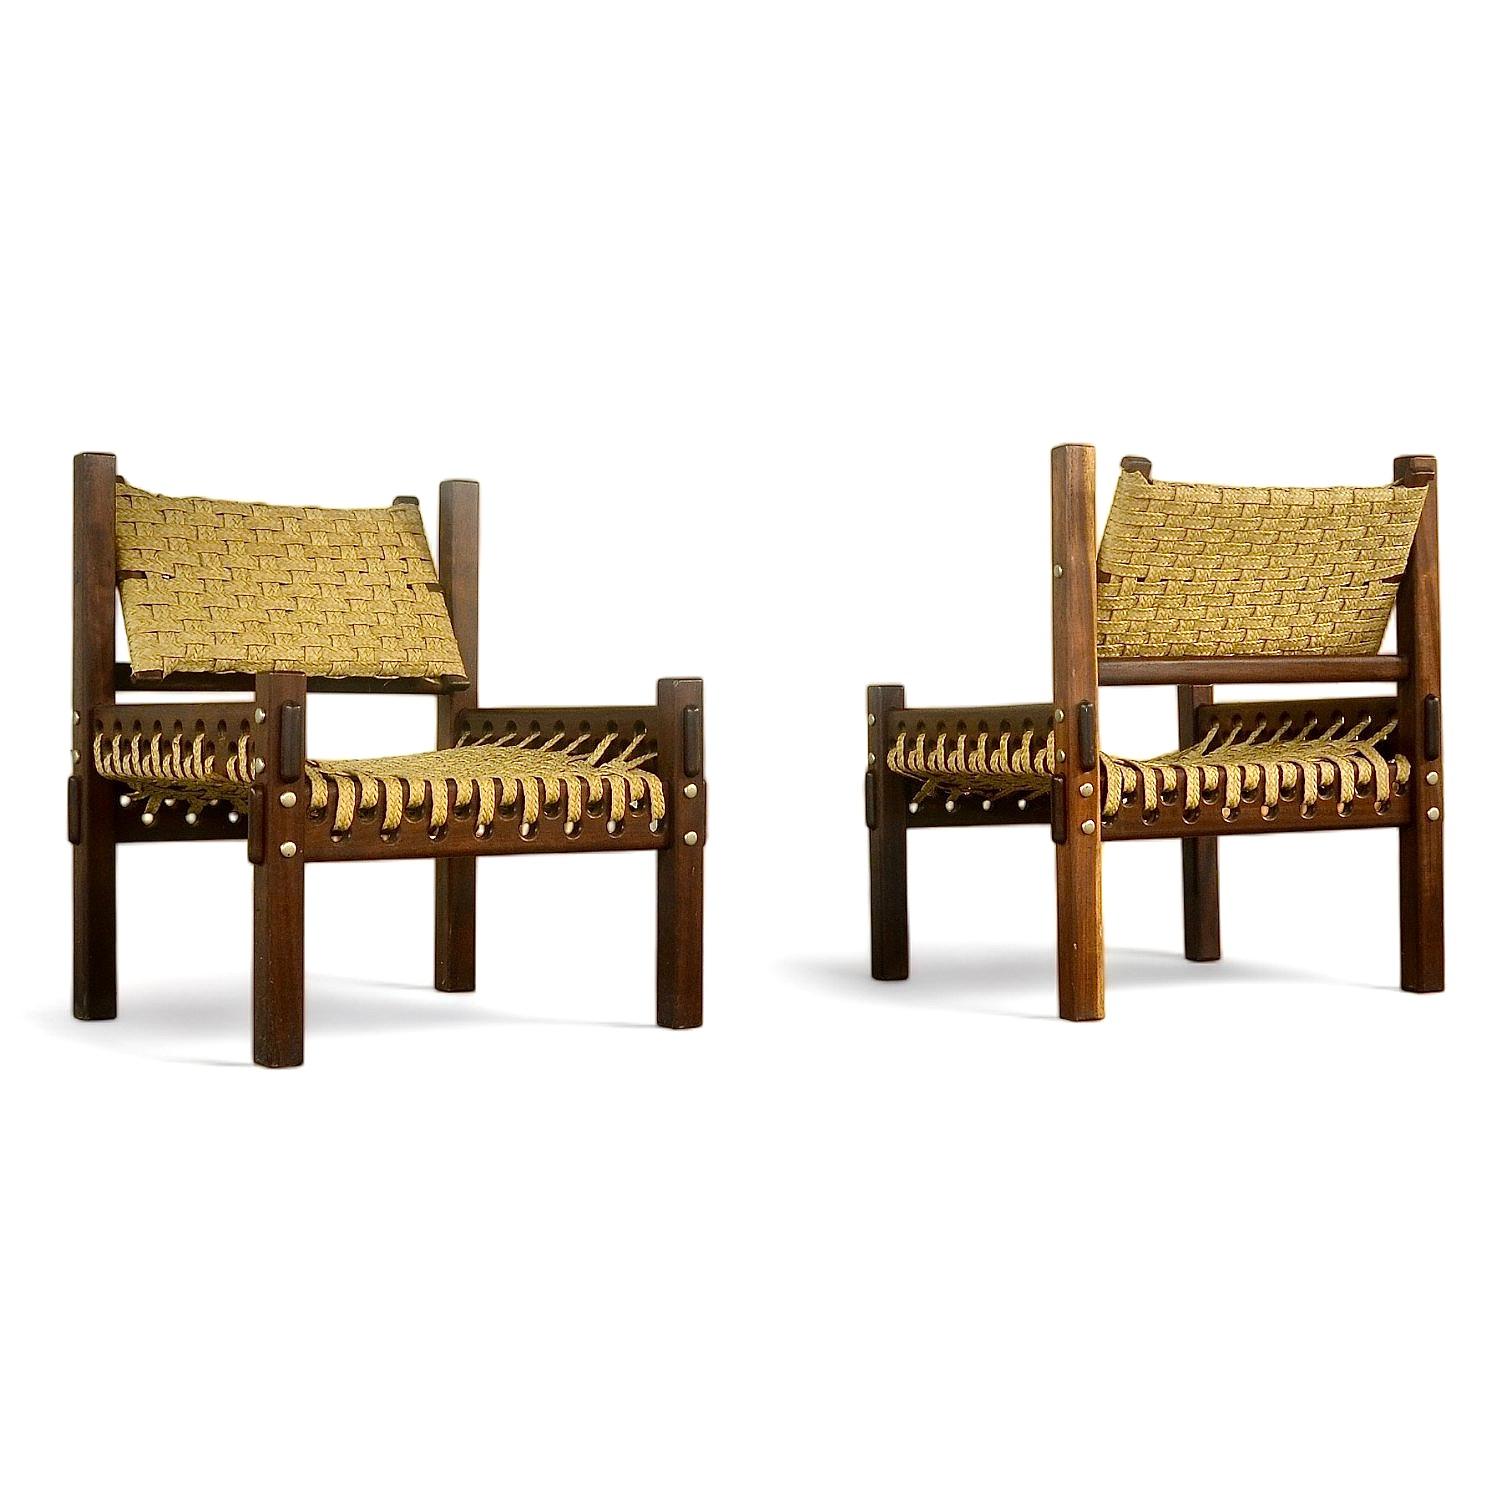 Mahogany and woven palm fiber armchairs, 1960s For Sale 10